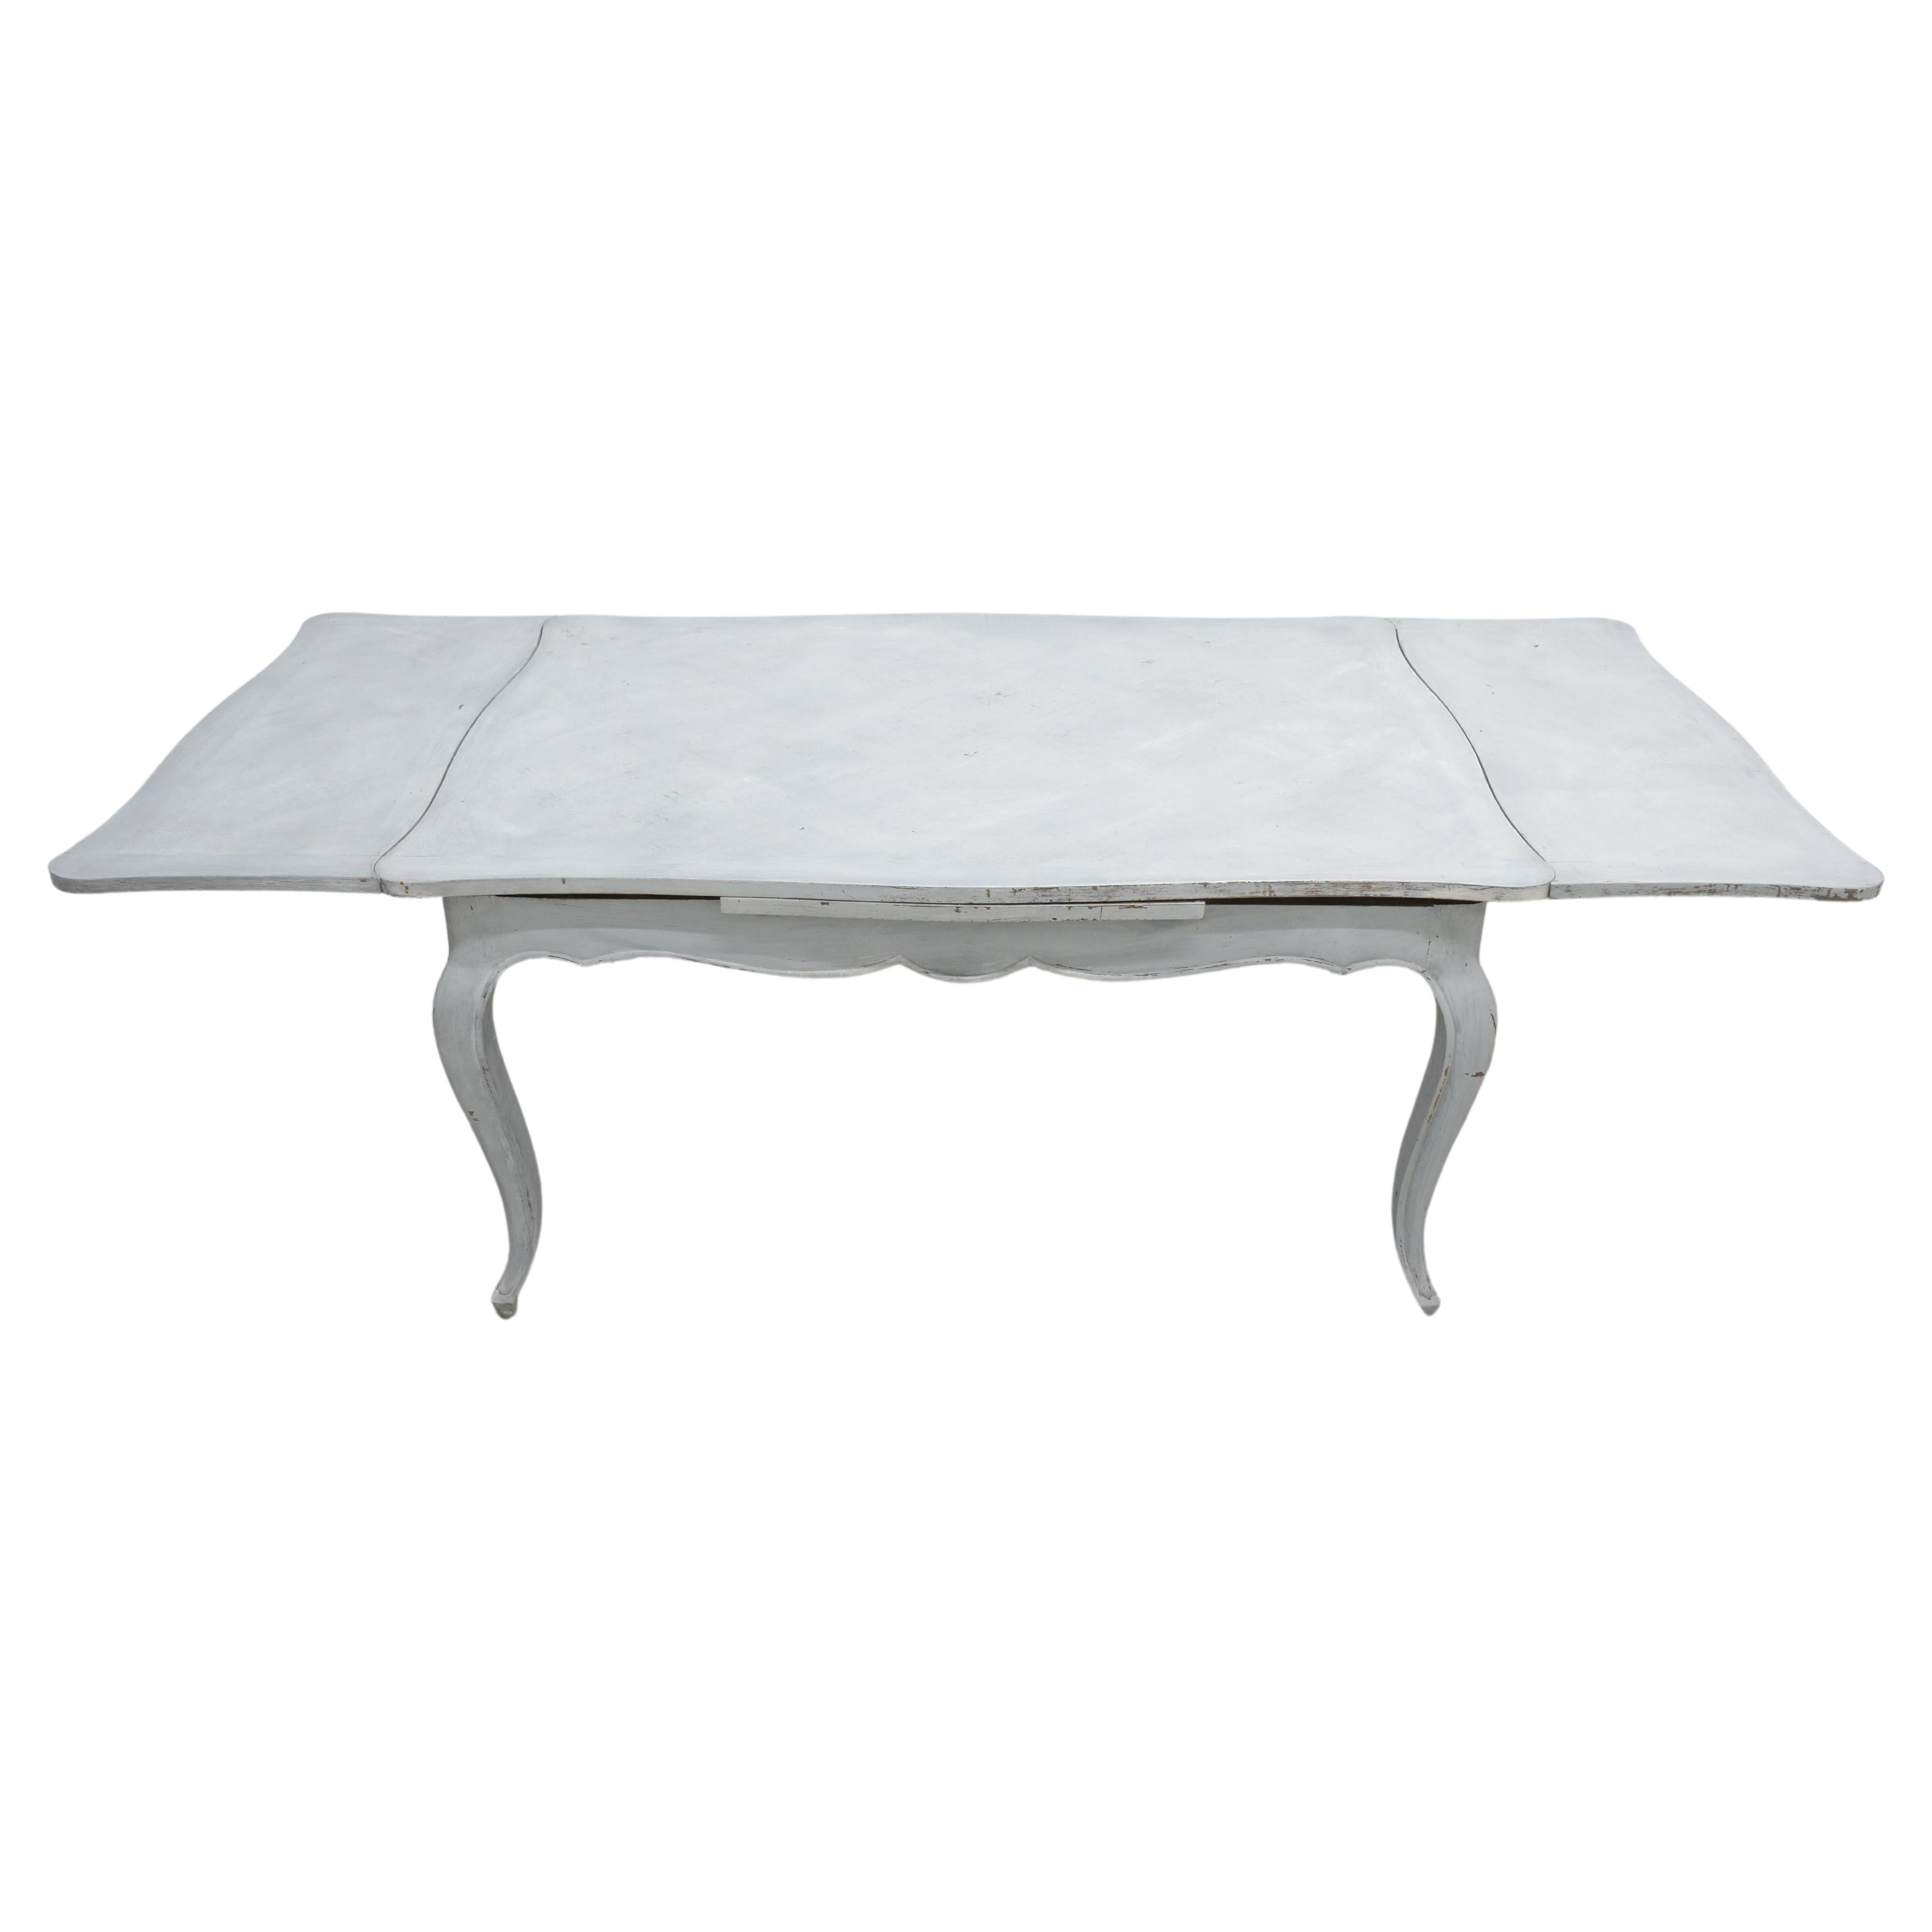 Early 1900s French Provincial Pale Grey Dining Table